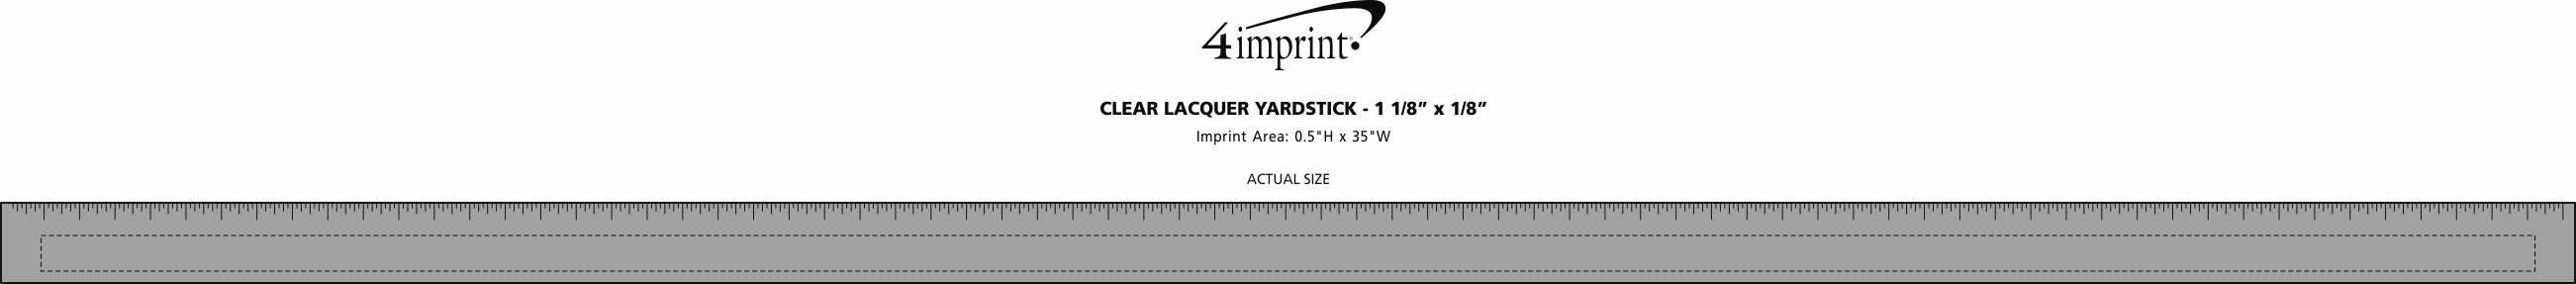 Imprint Area of Clear Lacquer Yardstick - 1-1/8" x 1/8"